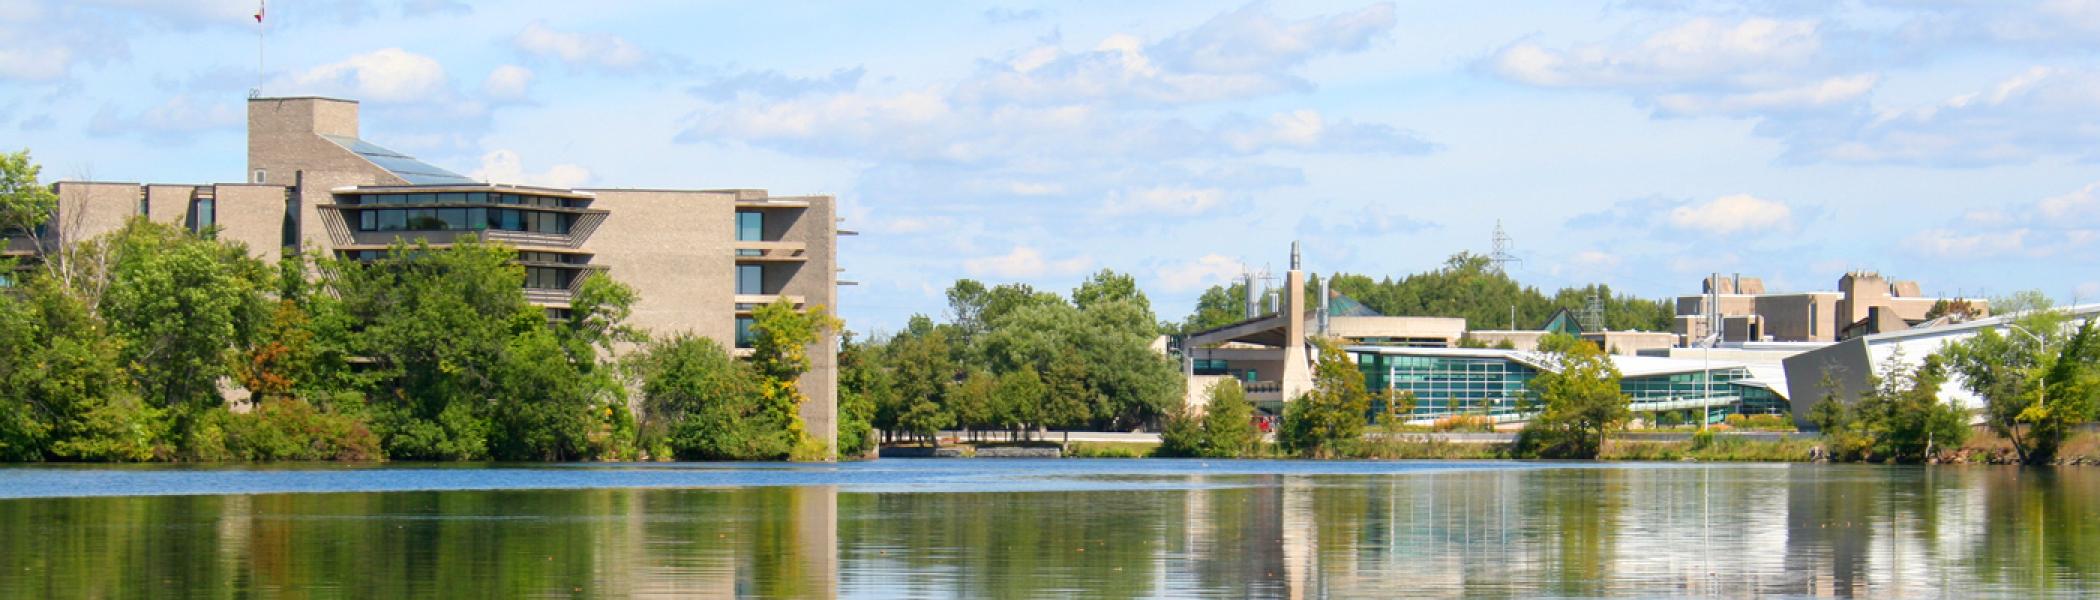 Trent University's Peterborough Campus from down-river highlighting Bata Library and the bridge.